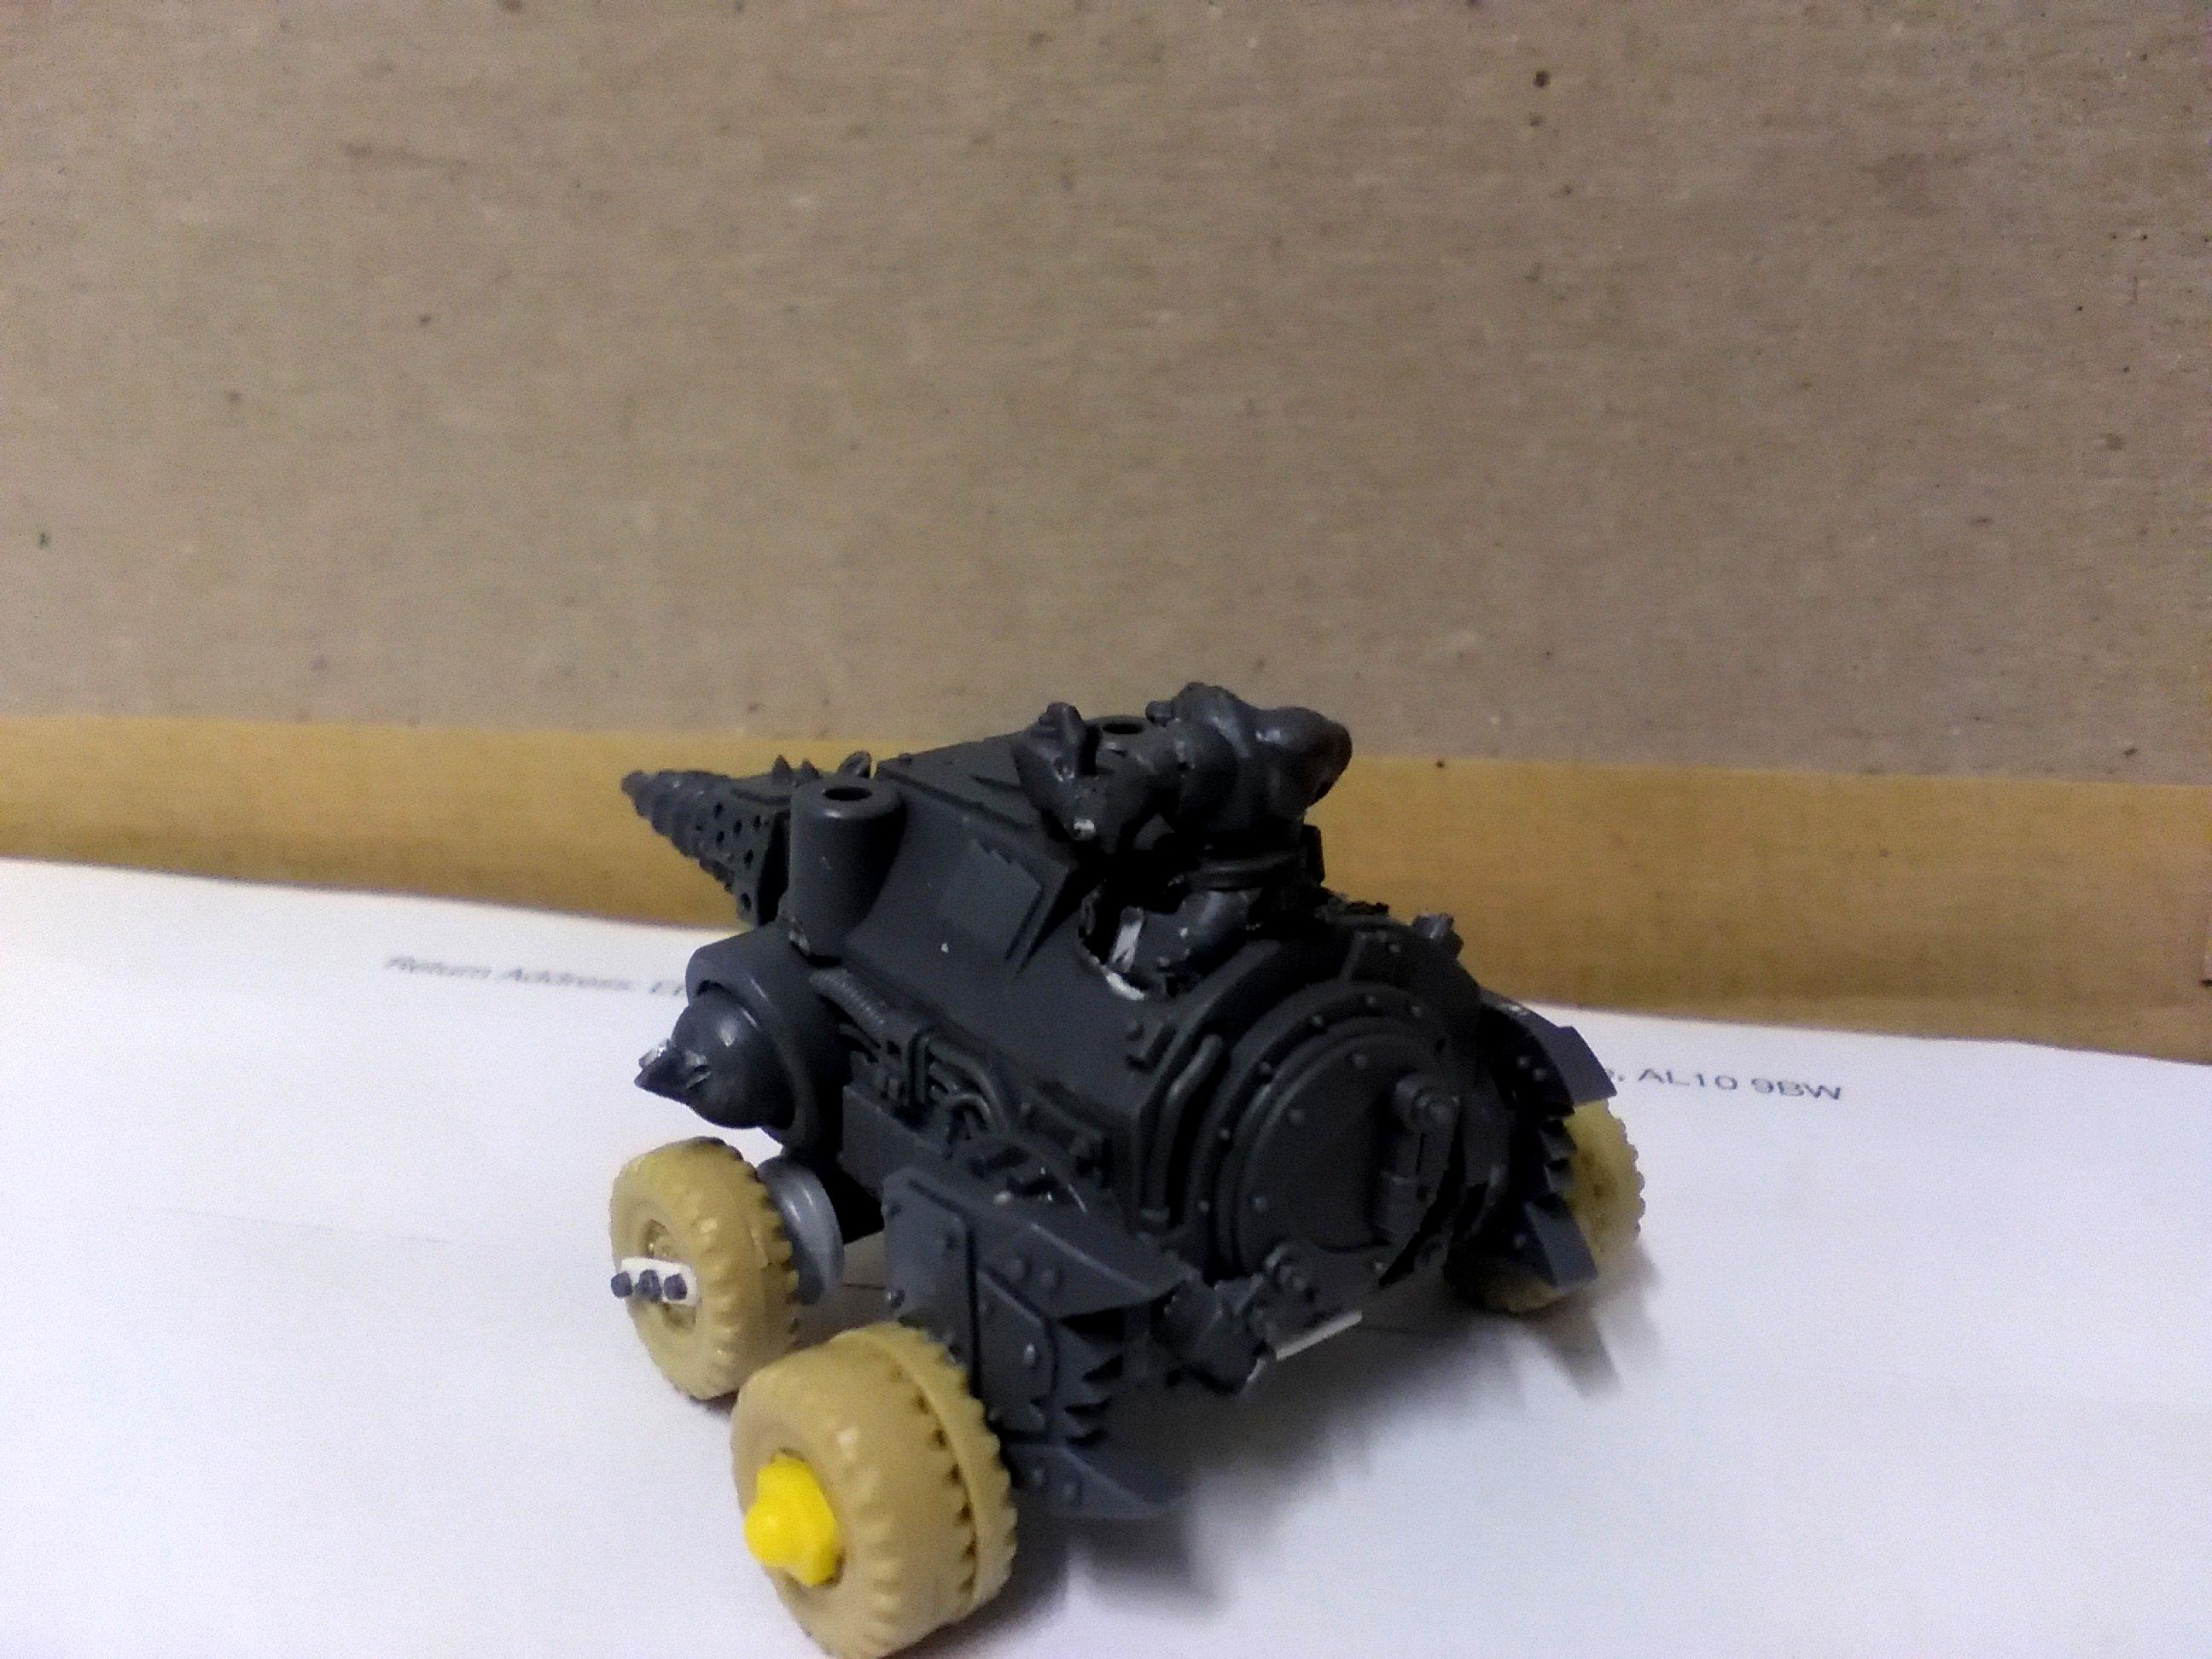 Conversion, Grot Conversion, Grots, Kitbash, Kitbashed, Ork Conversion, Ork Conversions, Ork Coustom Made Vehicles, Orks, Scratch Build, Warhammer 40,000